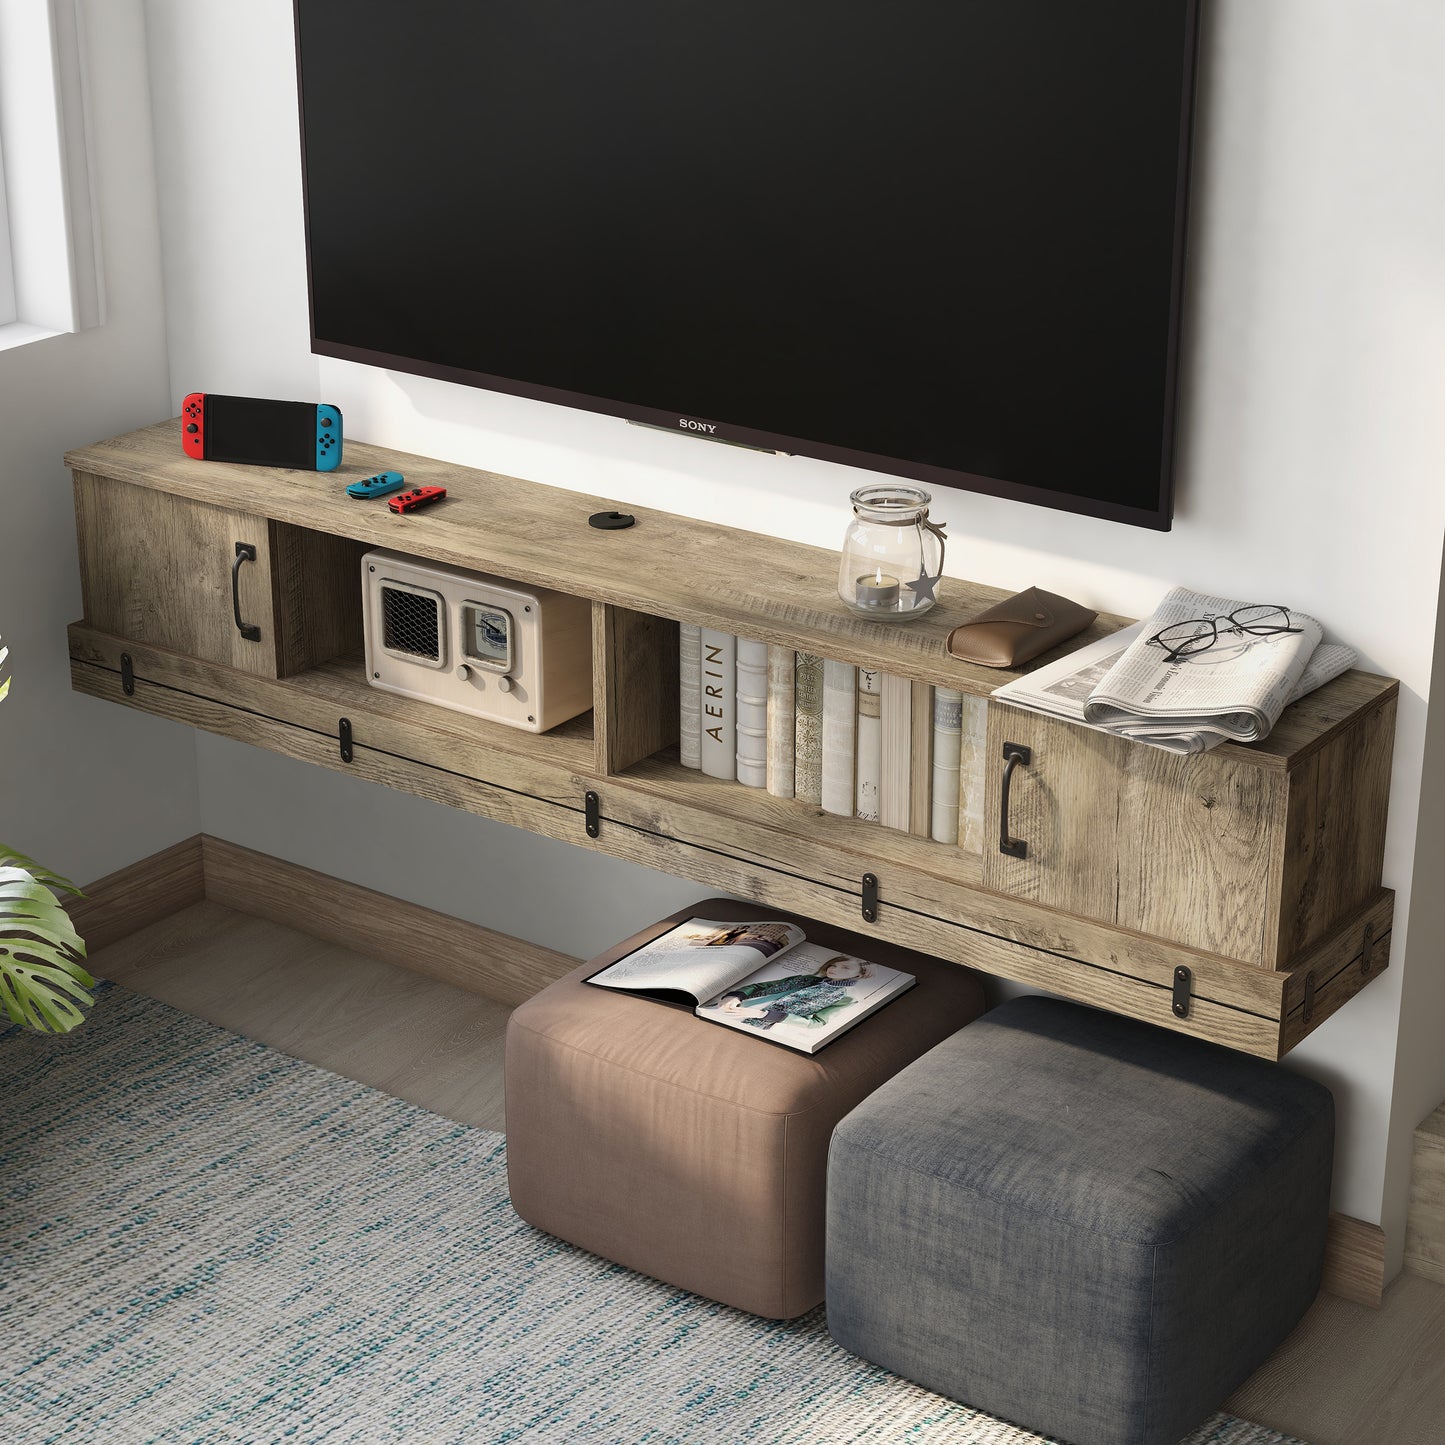 Left angled upper view of a rustic weathered oak two-door two-shelf floating TV stand in a living room with accessories